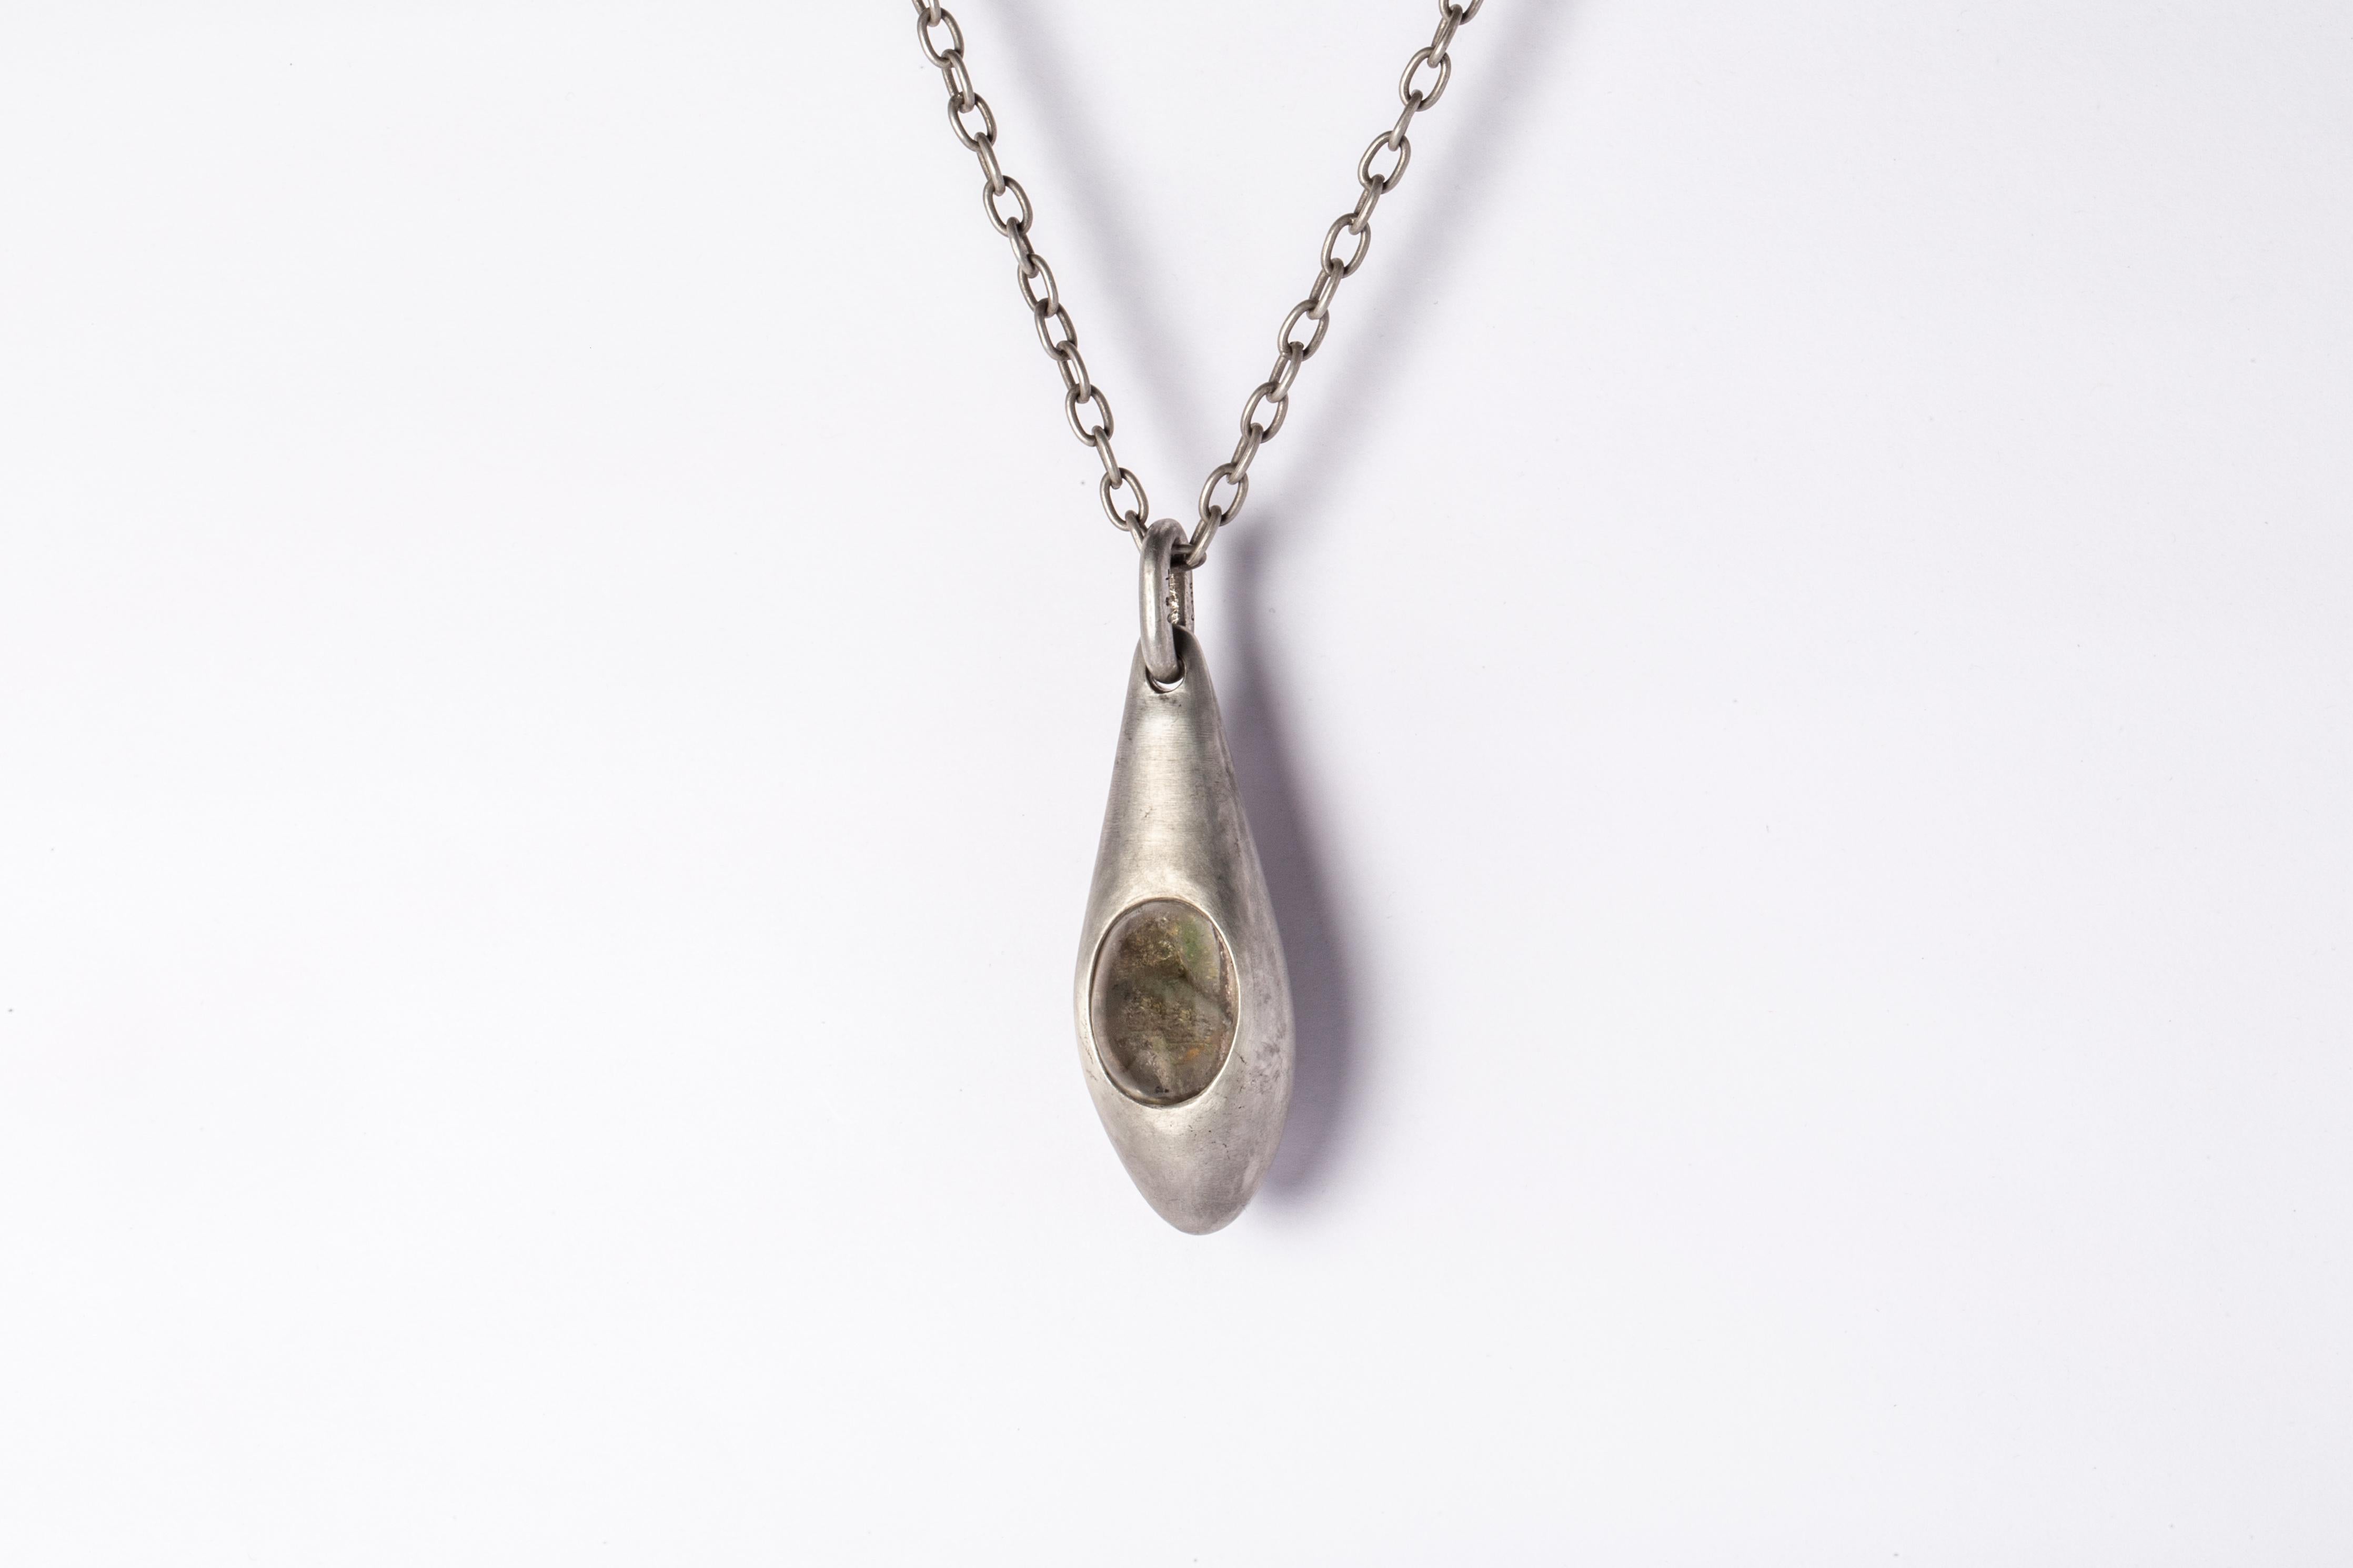 Necklace in acid treated sterling silver and a rough of garden quartz. It comes on 74 cm sterling silver chain.